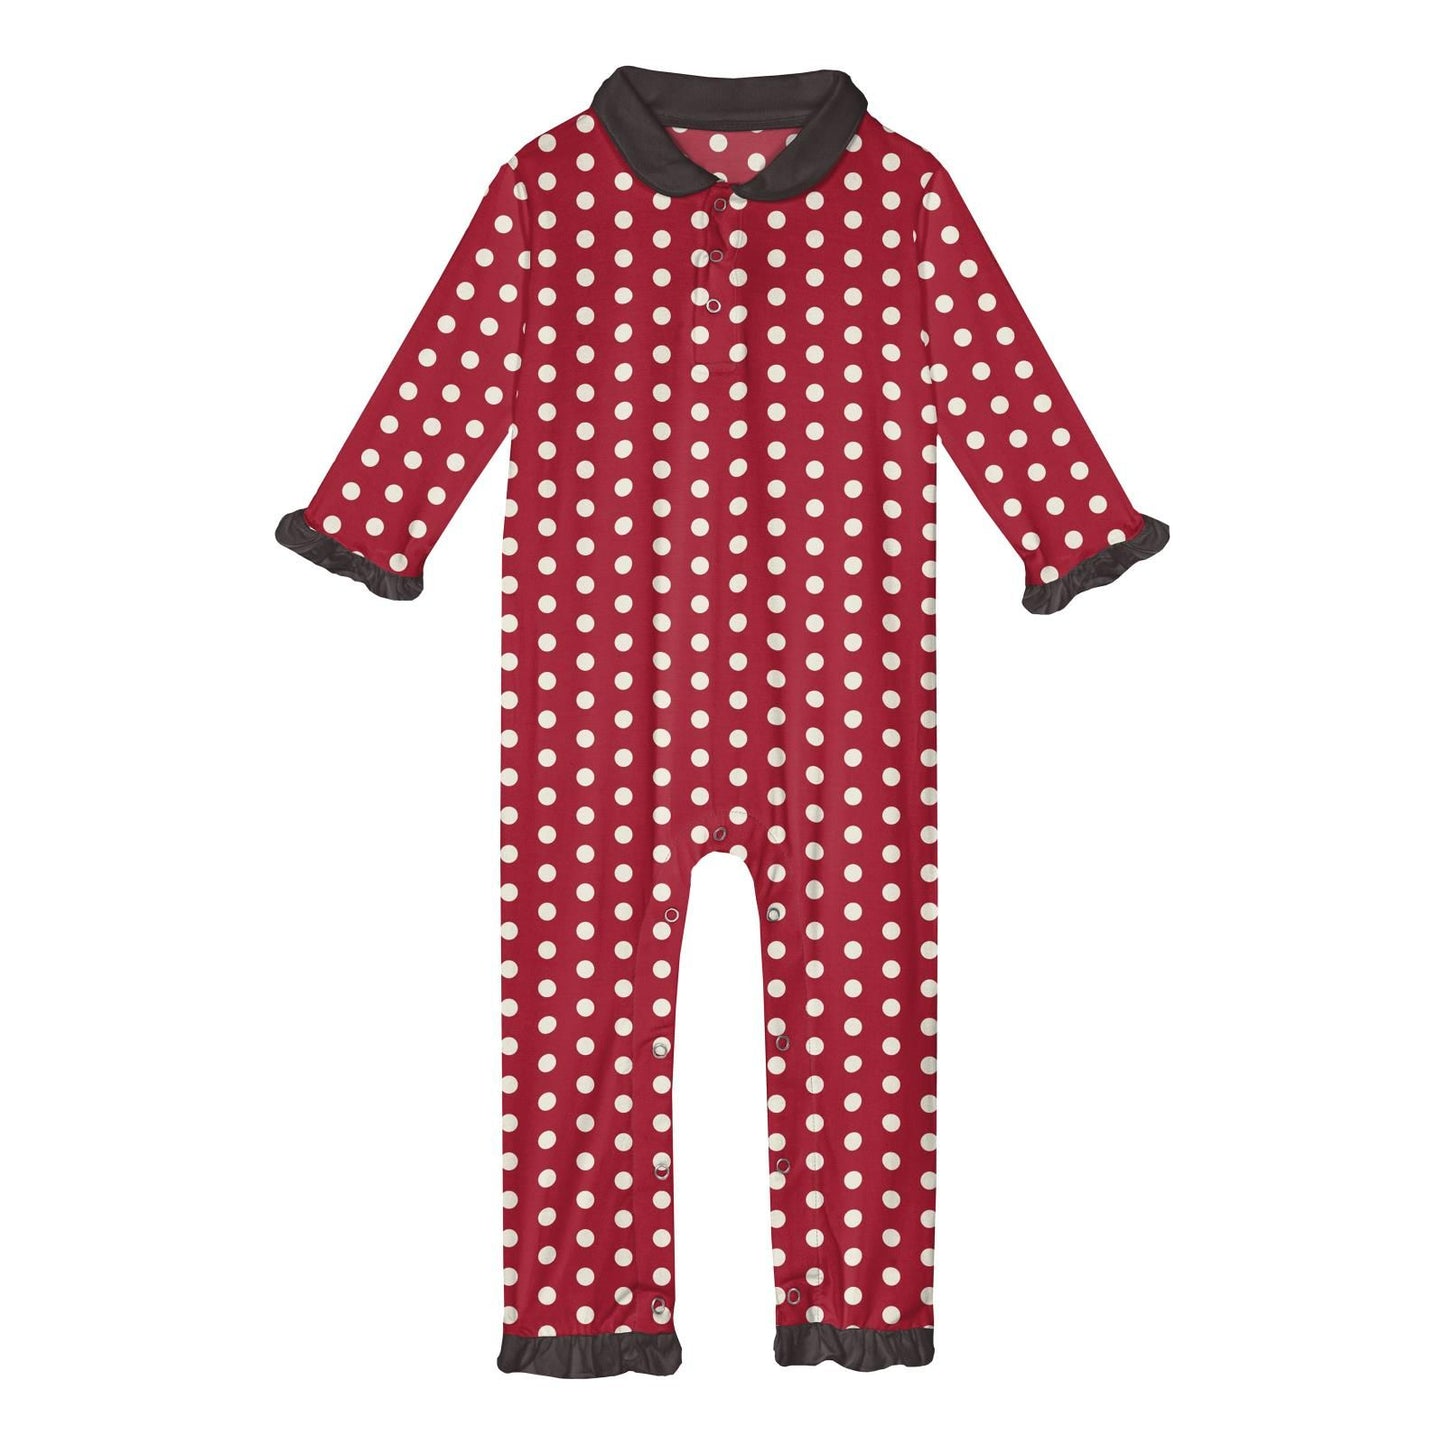 Peter Pan Collared Romper (Long Sleeve) - Candy Apple Polka Dot